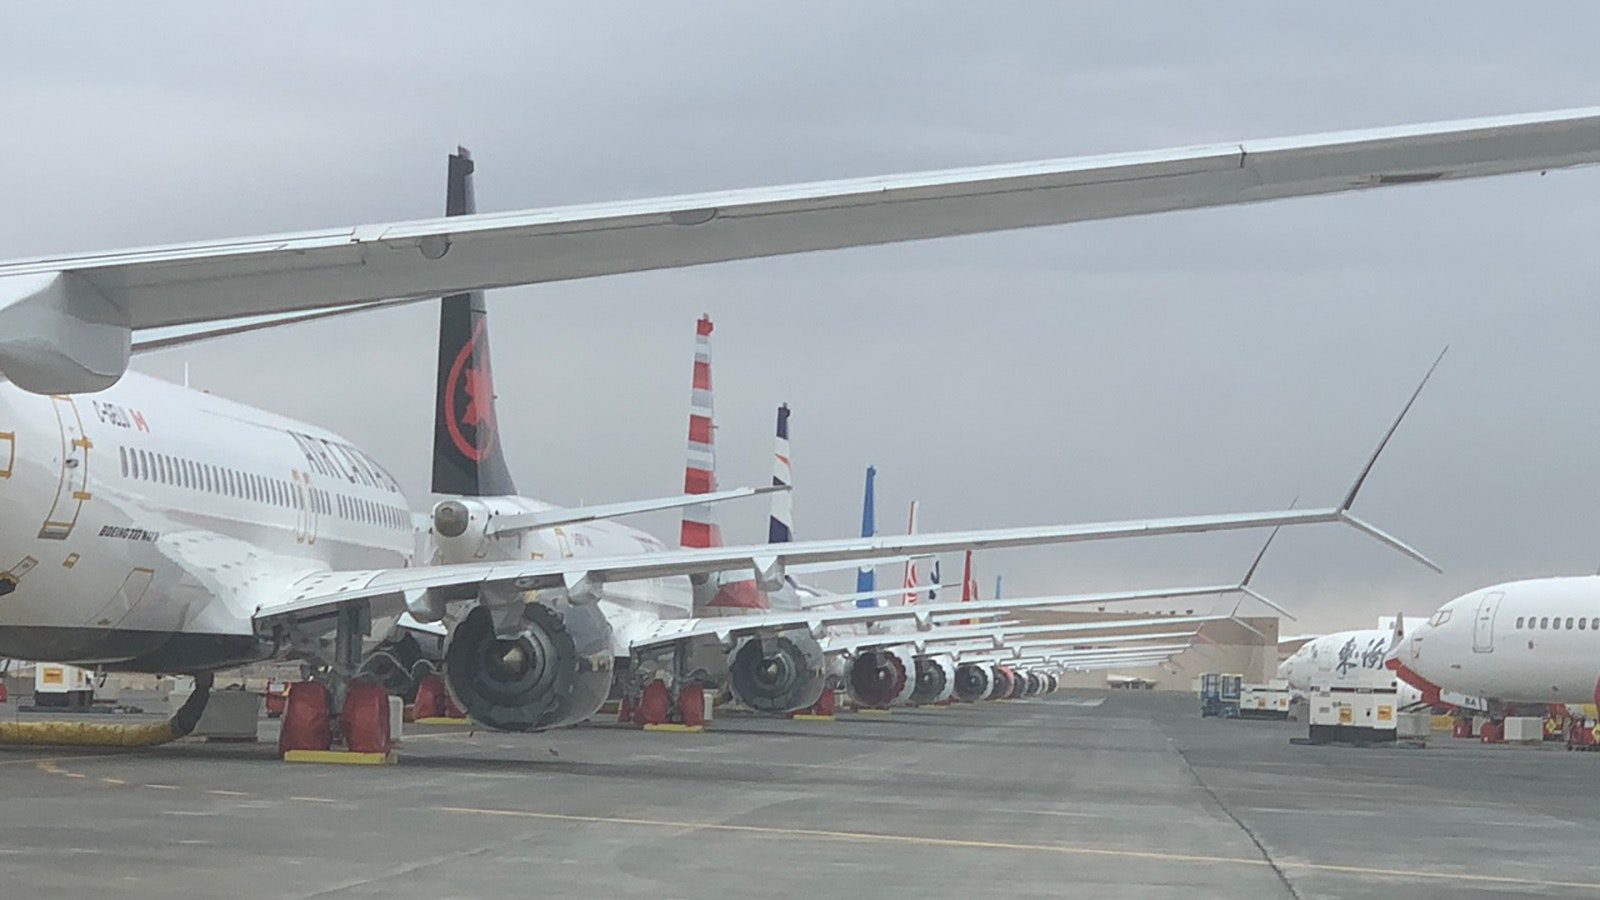 A long line of parked jets.